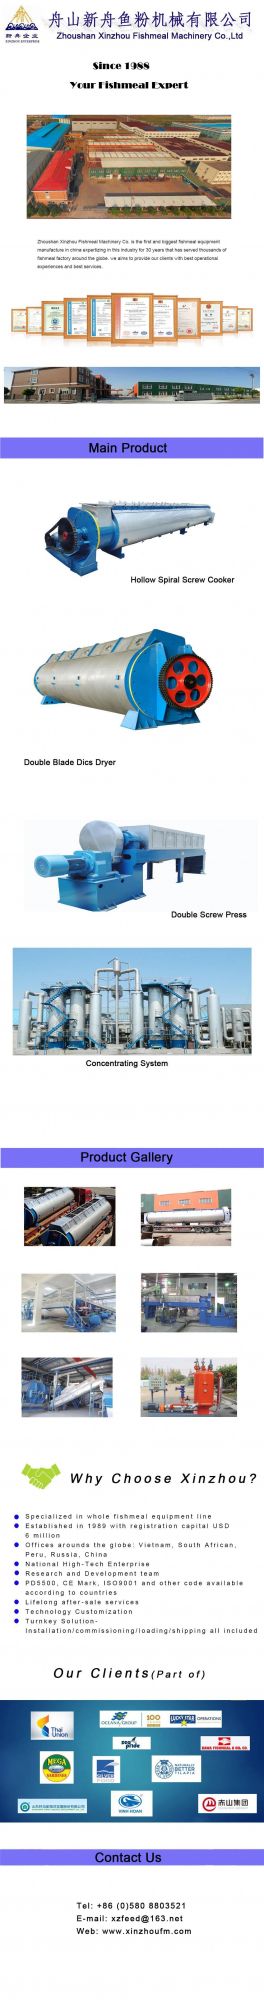 Fish Meal and Fish Oil Production Line (Xinzhou Brand)